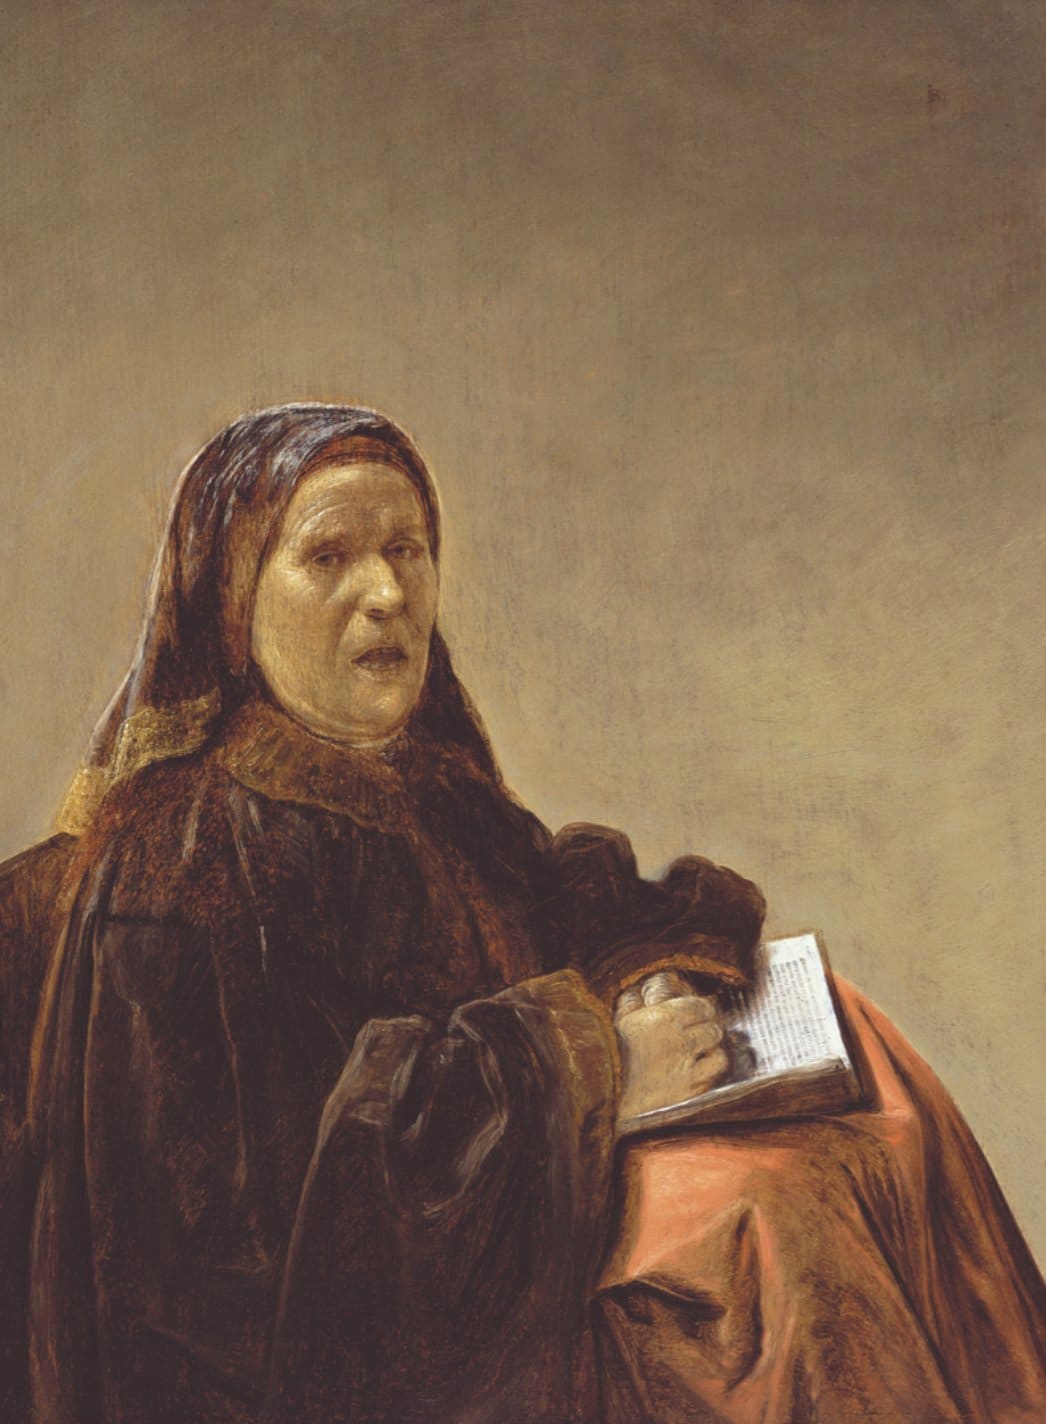 Master IS, An Old Woman Singing, around 1638, oil on panel. Gift of Alfred and Isabel Bader, 2014